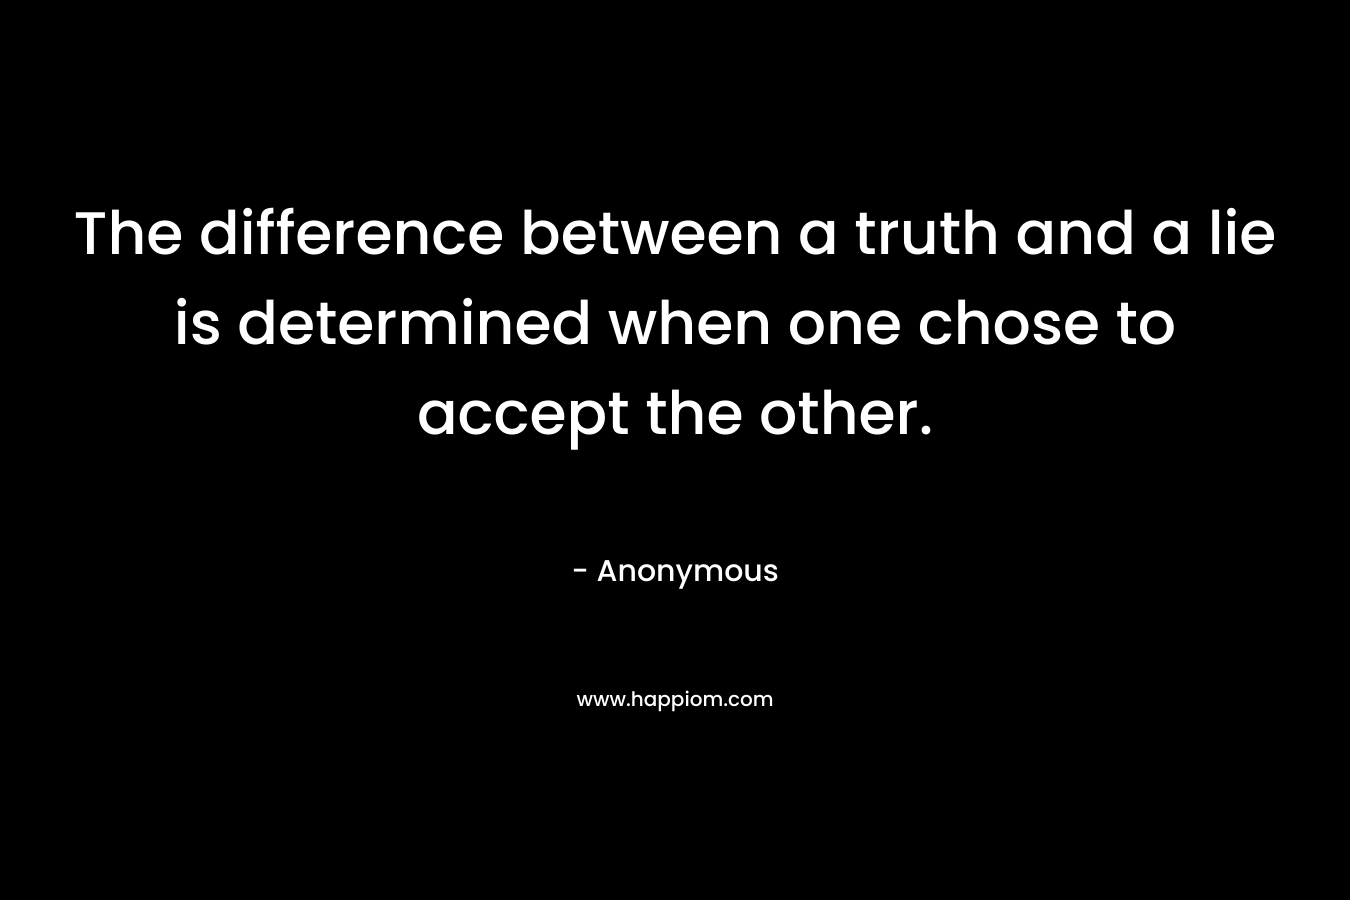 The difference between a truth and a lie is determined when one chose to accept the other.